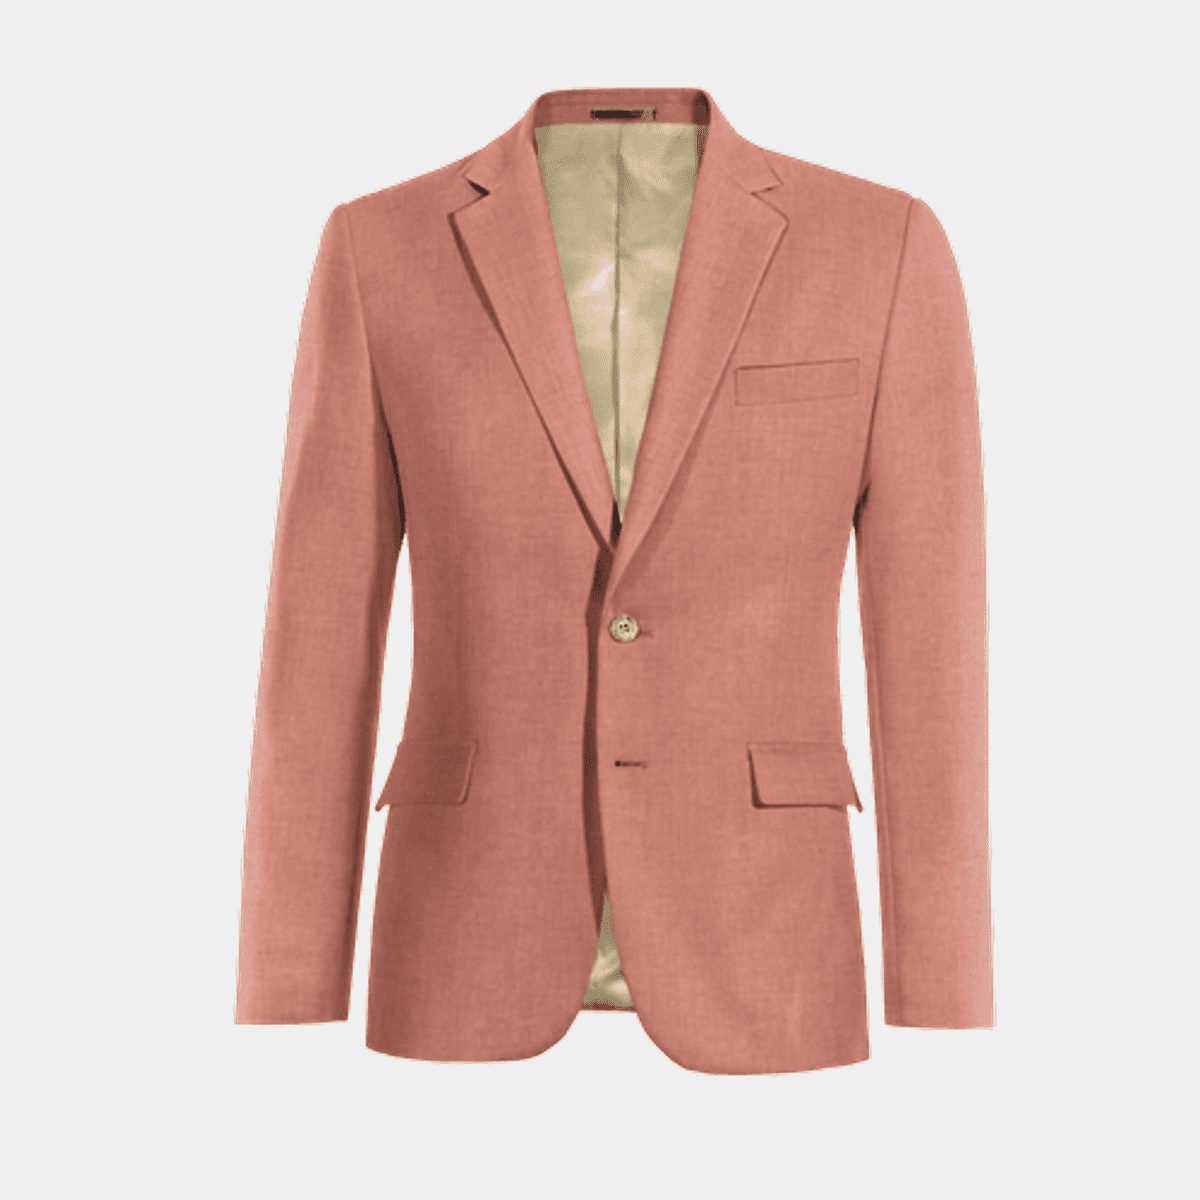 Linen Jackets for Men  The Perfect Summer Jacket - Hockerty